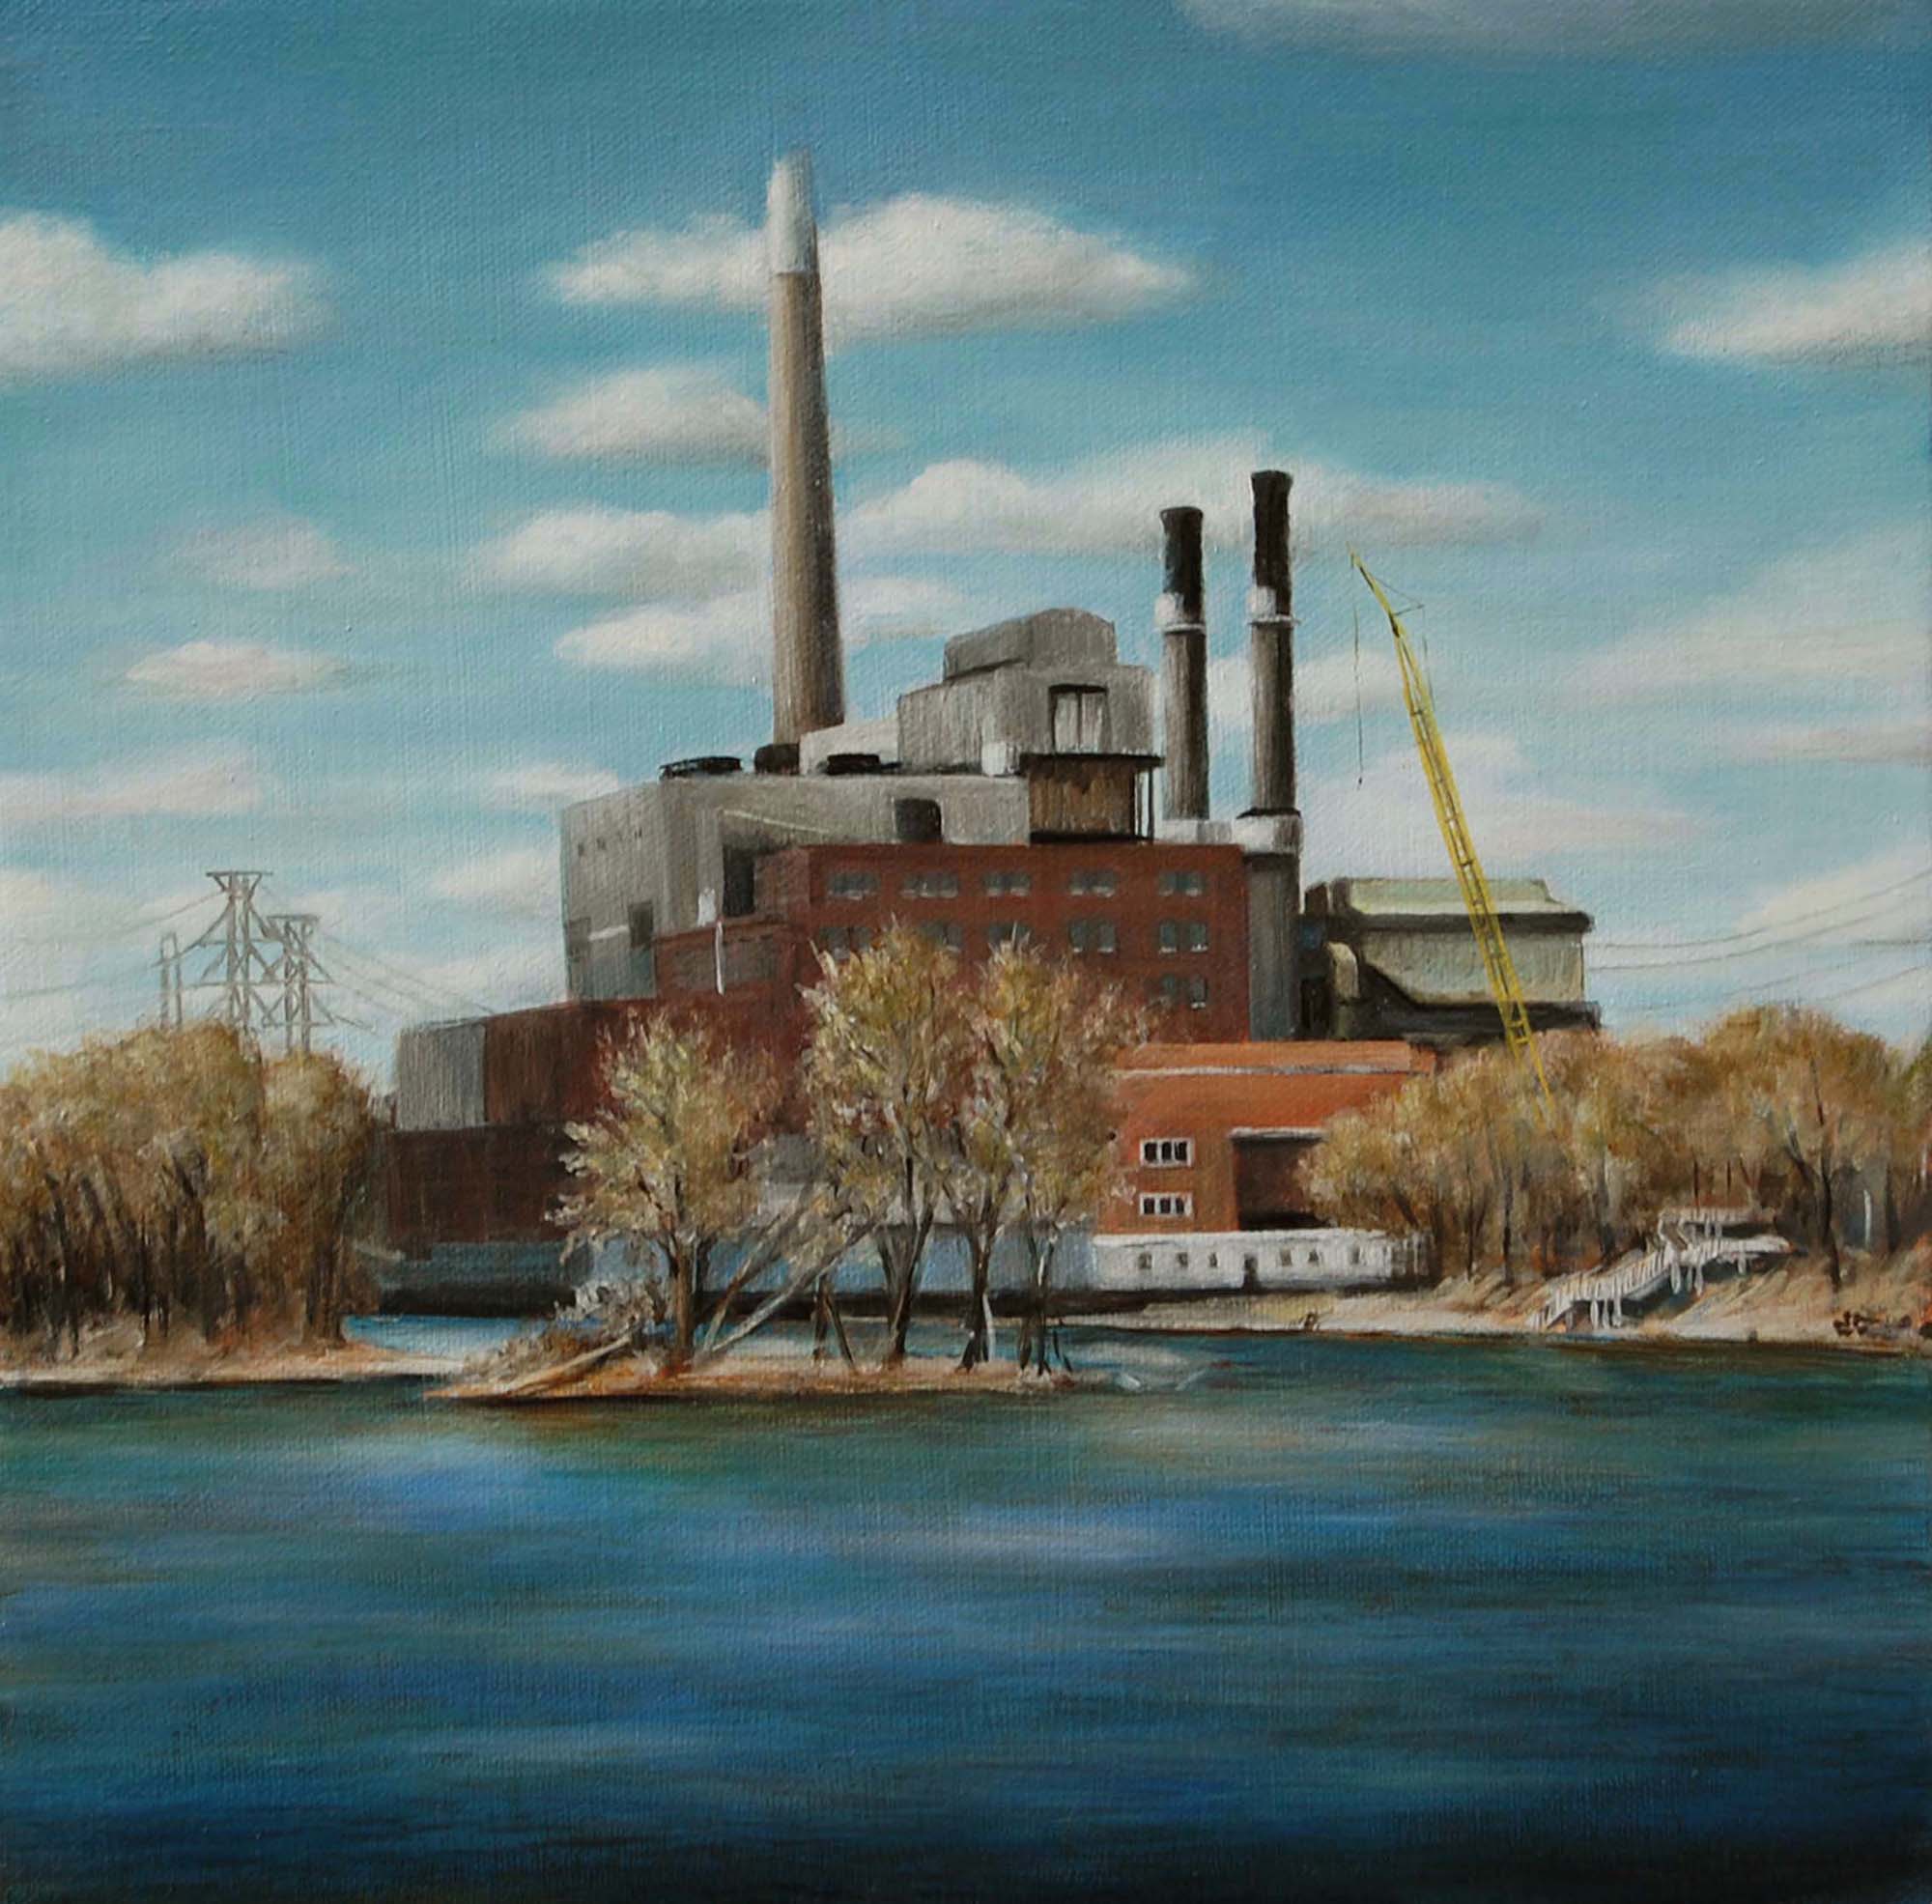   Riverside Power Station,    from Mississippi River   2009  Oil on canvas  12 x 12 inches    